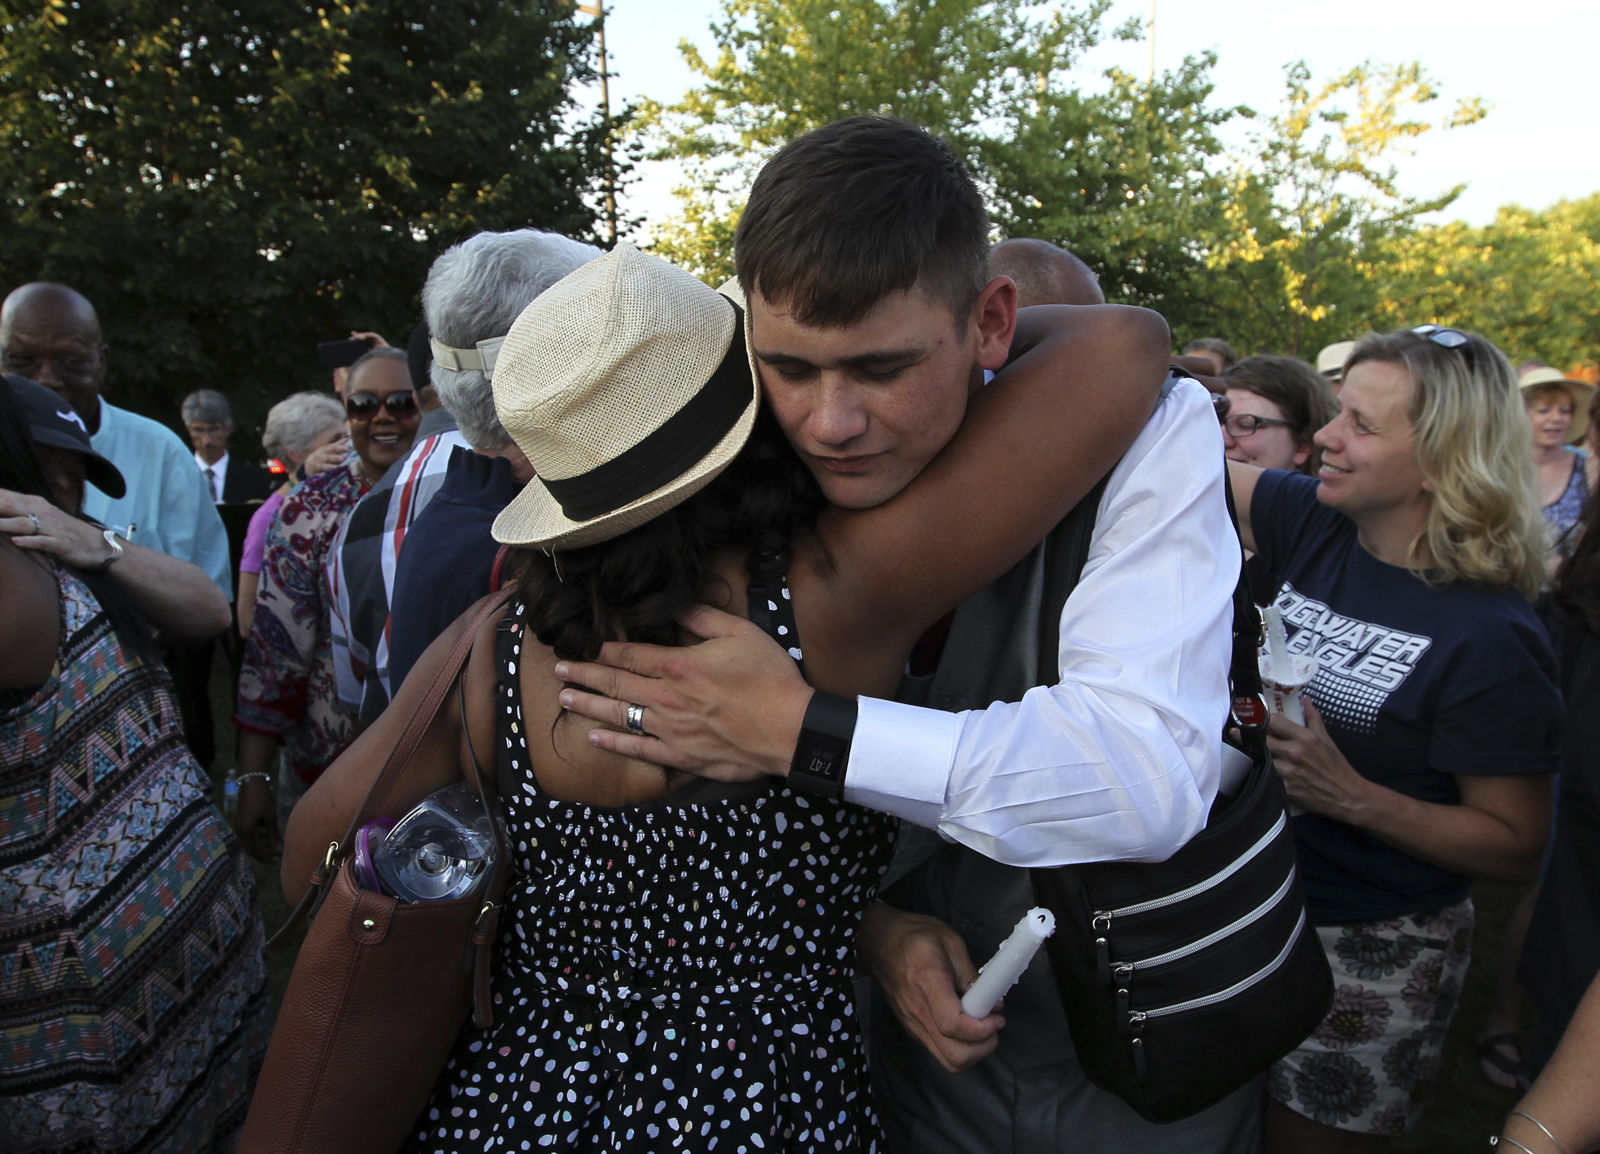 People hug during a candlelight vigil across the street from where five journalists were slain in their newsroom in Annapolis, Md., Friday, June 29, 2018. Prosecutors say Jarrod W. Ramos opened fire Thursday in the Capital Gazette newsroom. (AP Photo/Jose Luis Magana)